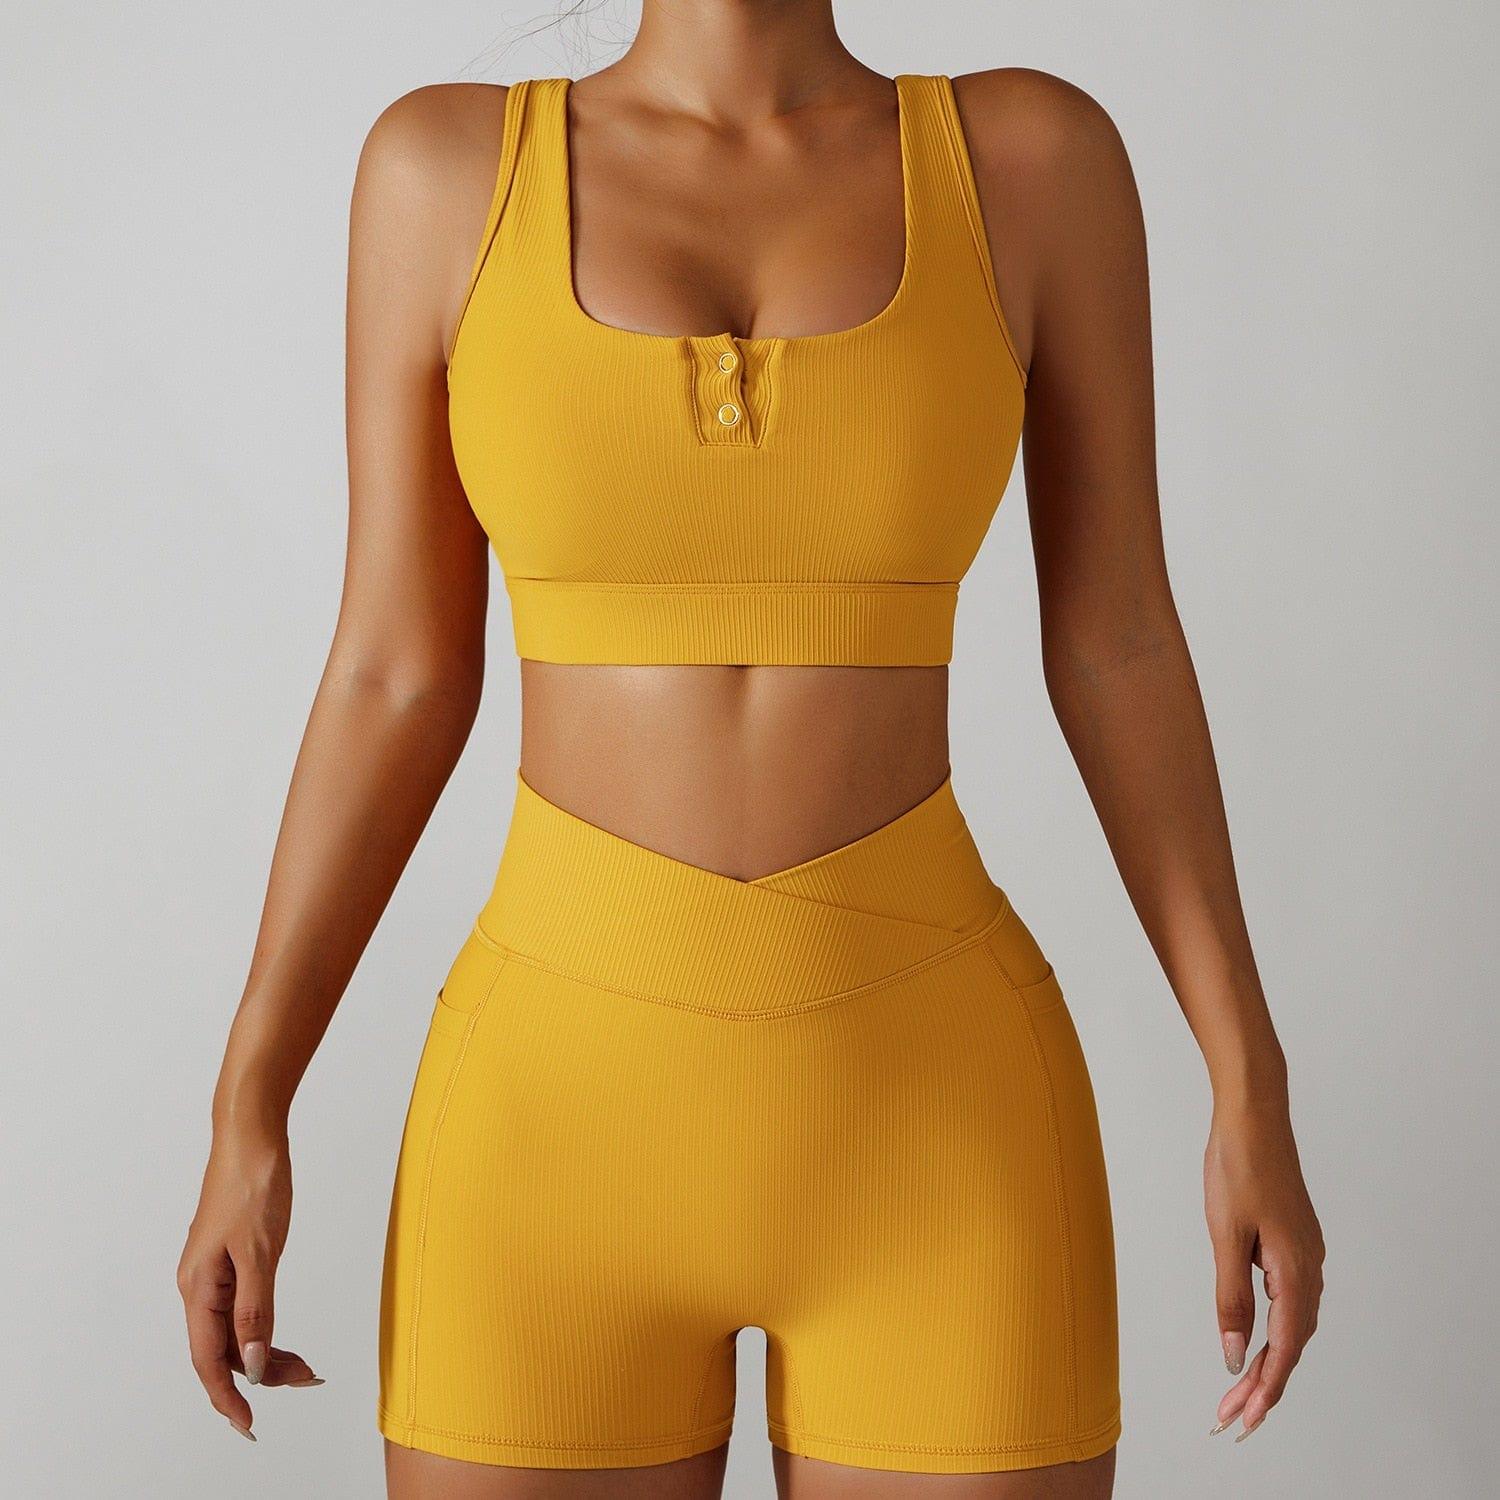 Shop 0 Yellow suit-1 / S / China 2 Pieces Seamless Women Tracksuit  Yoga Set Running Workout Sportswear Gym Clothes Fitness Bra High Waist Leggings Sports Suit Mademoiselle Home Decor